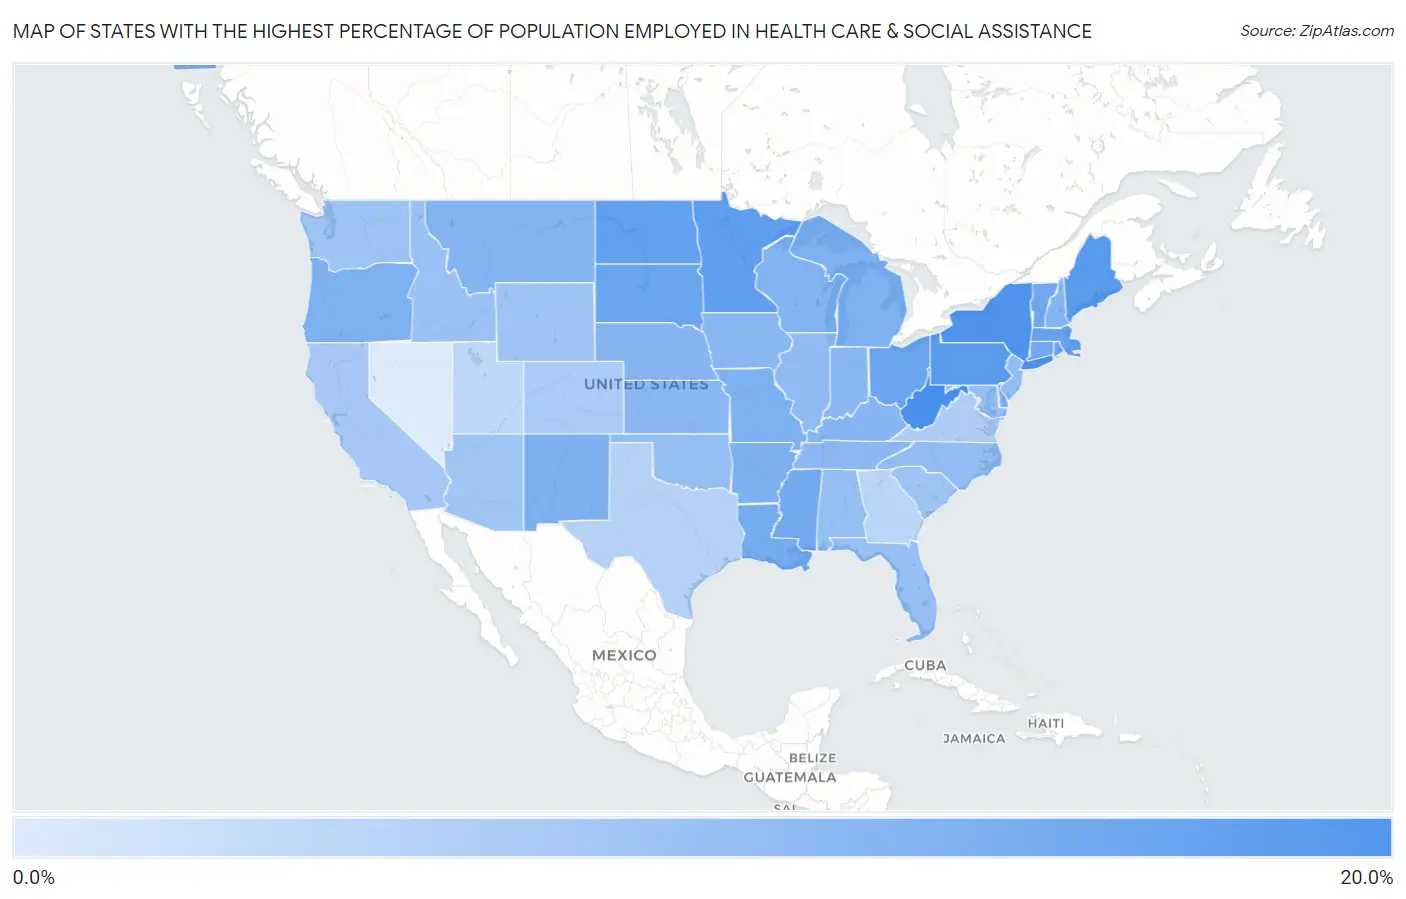 States with the Highest Percentage of Population Employed in Health Care & Social Assistance in the United States Map